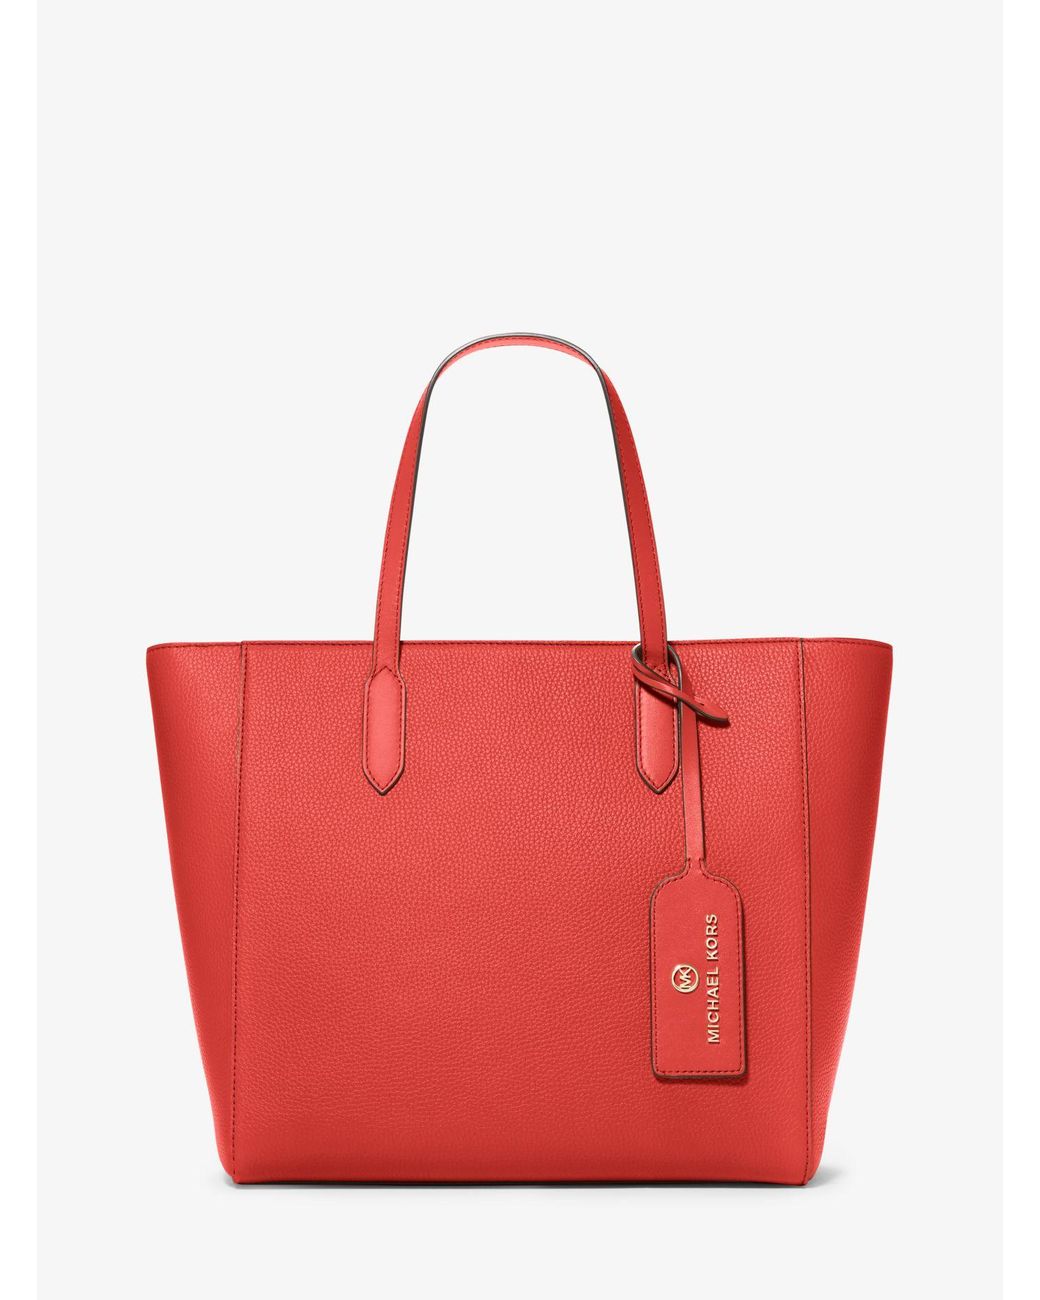 Michael Kors Sinclair Large Pebbled Leather Tote Bag in Red | Lyst